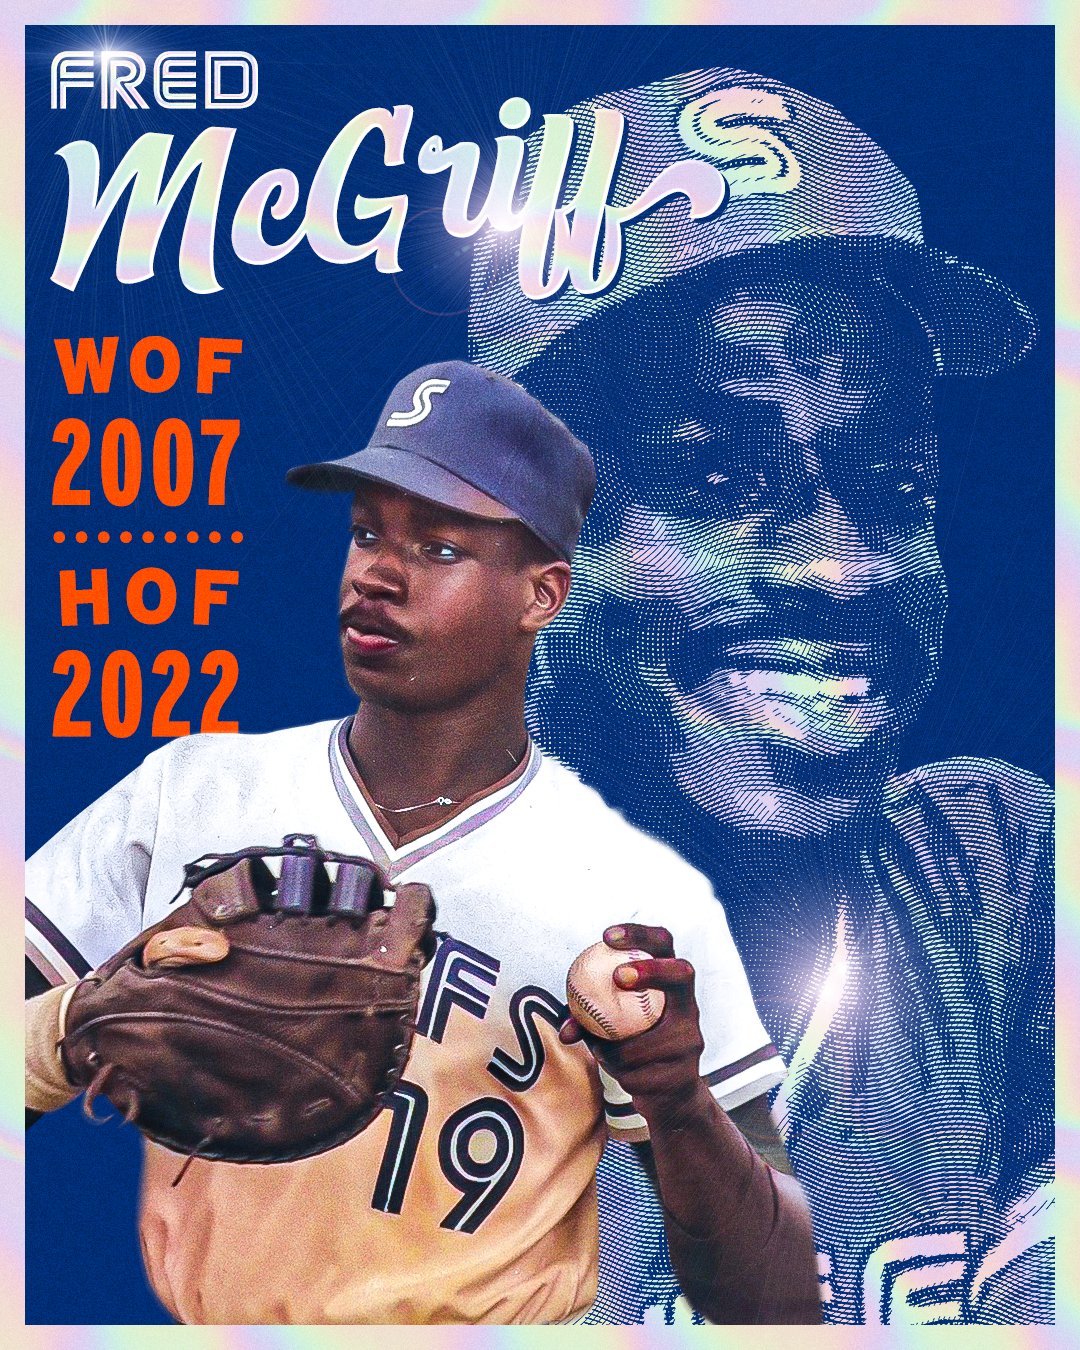 Syracuse Mets on X: 'Congratulations to newly-minted Baseball Hall-of-Famer  Fred McGriff, who played for the Syracuse Chiefs from 1984-86! He won the  International League pennant with the Chiefs in 1985 & was